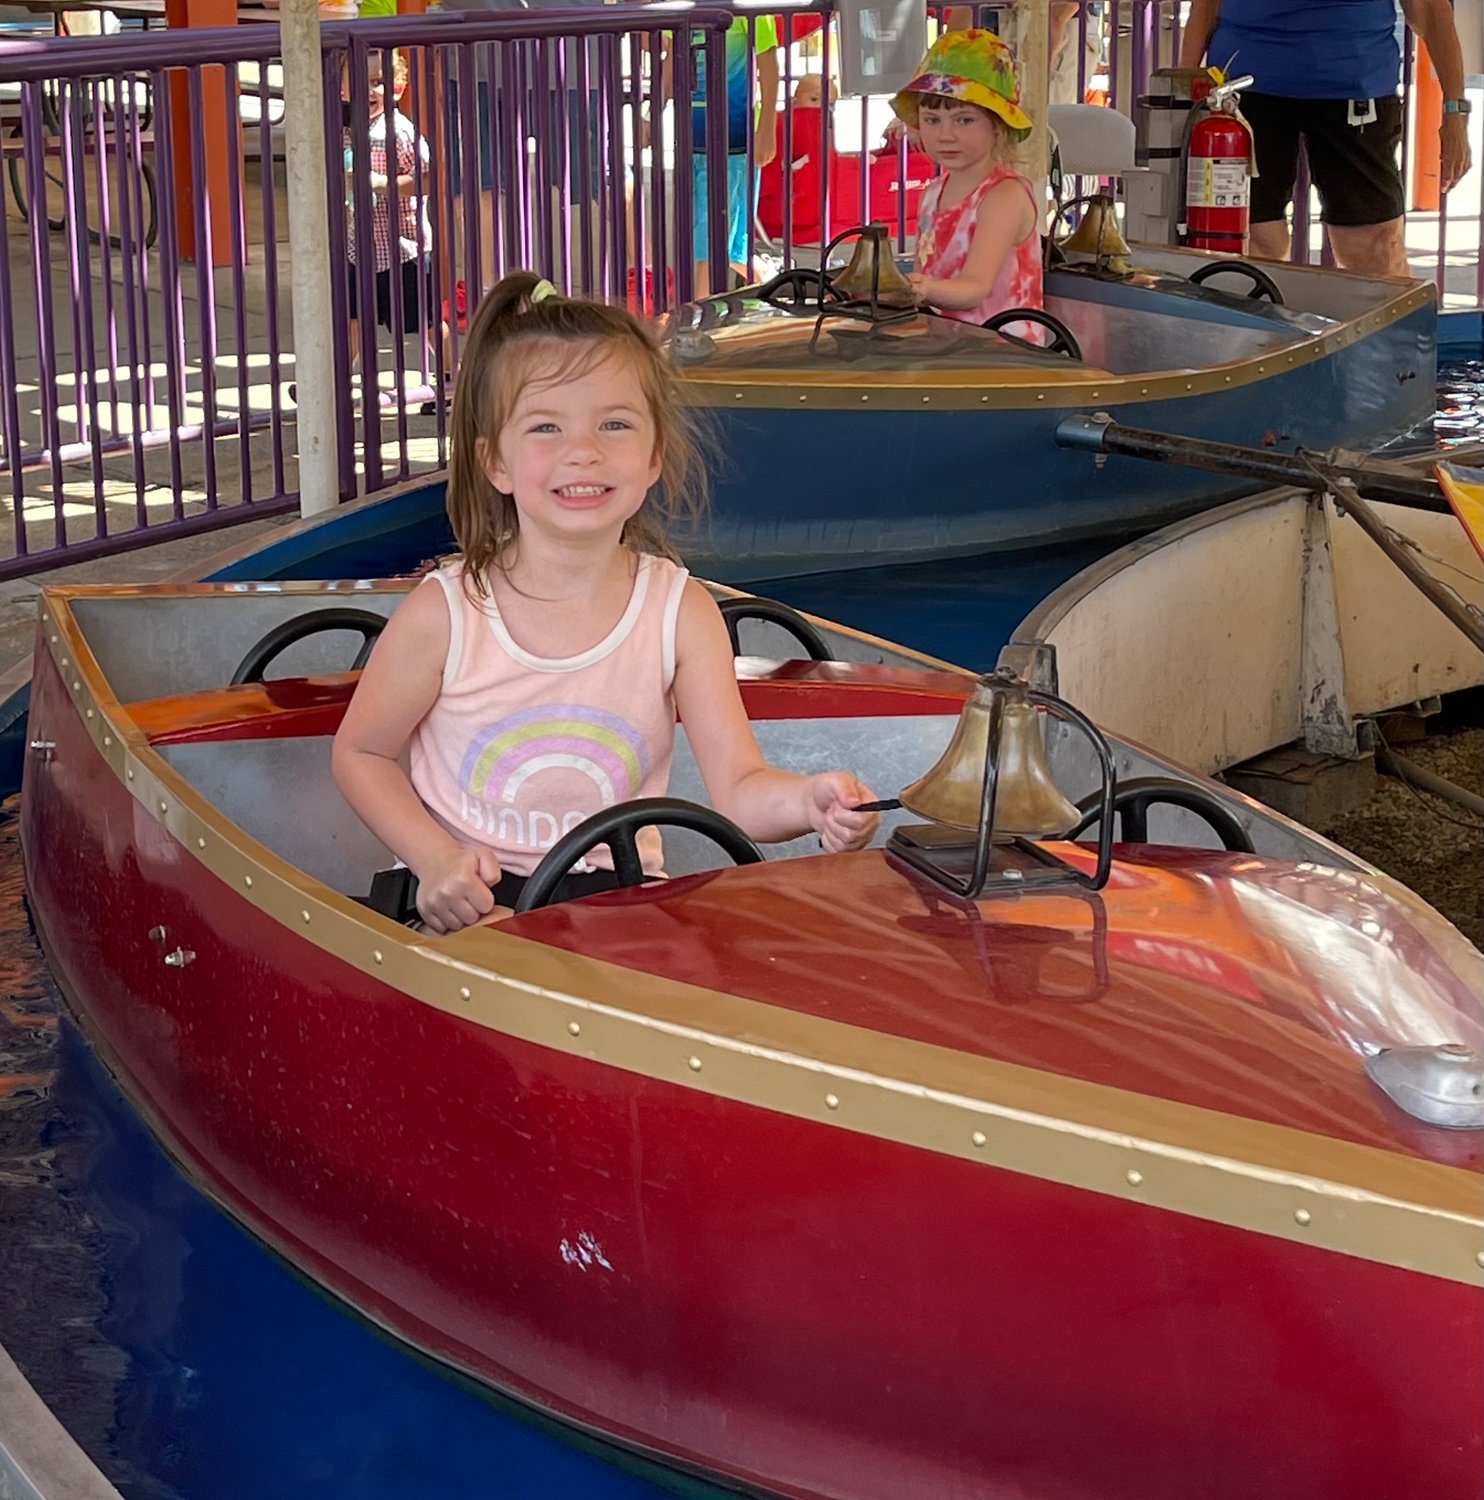 Stephanie Brown submitted the winning Summer Photo Contest entry titled “Fiona” at Indiana Beach. Brown won a $100 Amazon gift card and tickets to Holiday World.